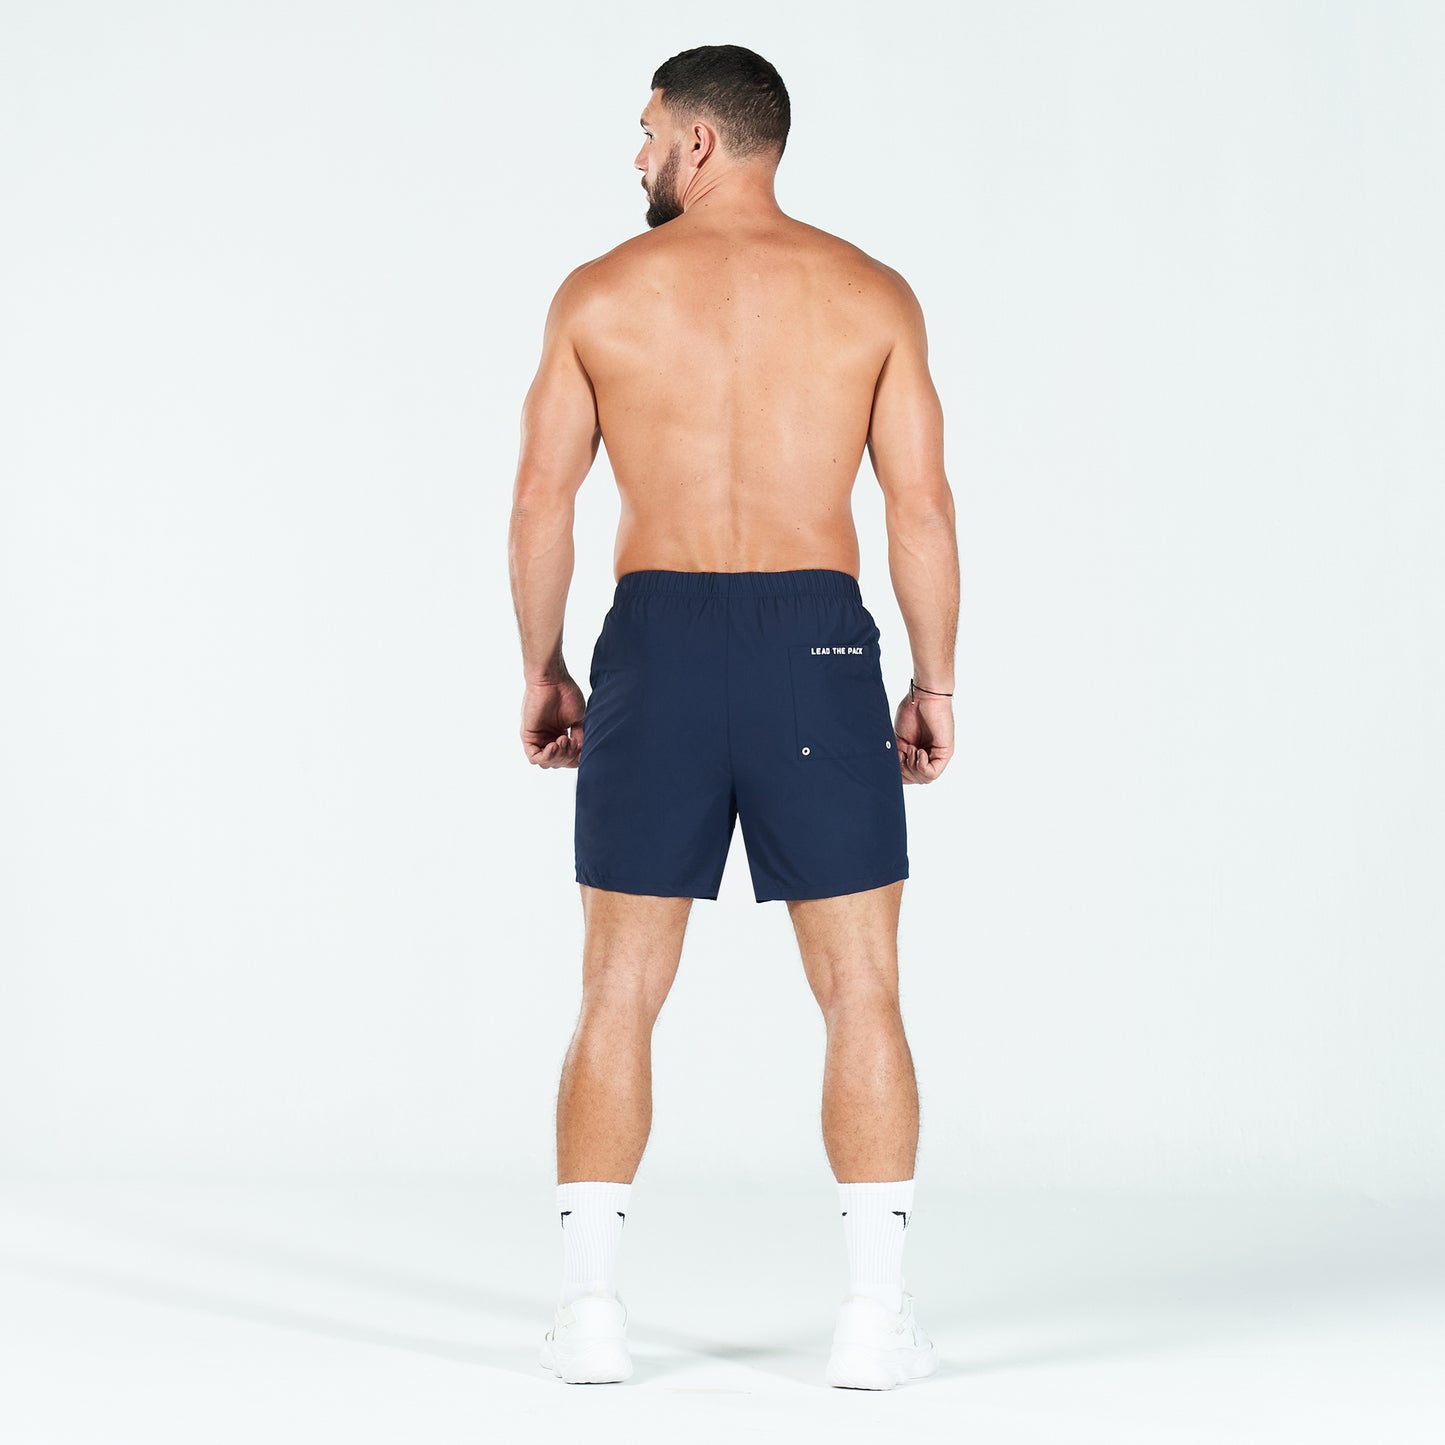 squatwolf-gym-wear-statement-quick-dry-shorts-navy-workout-short-for-men